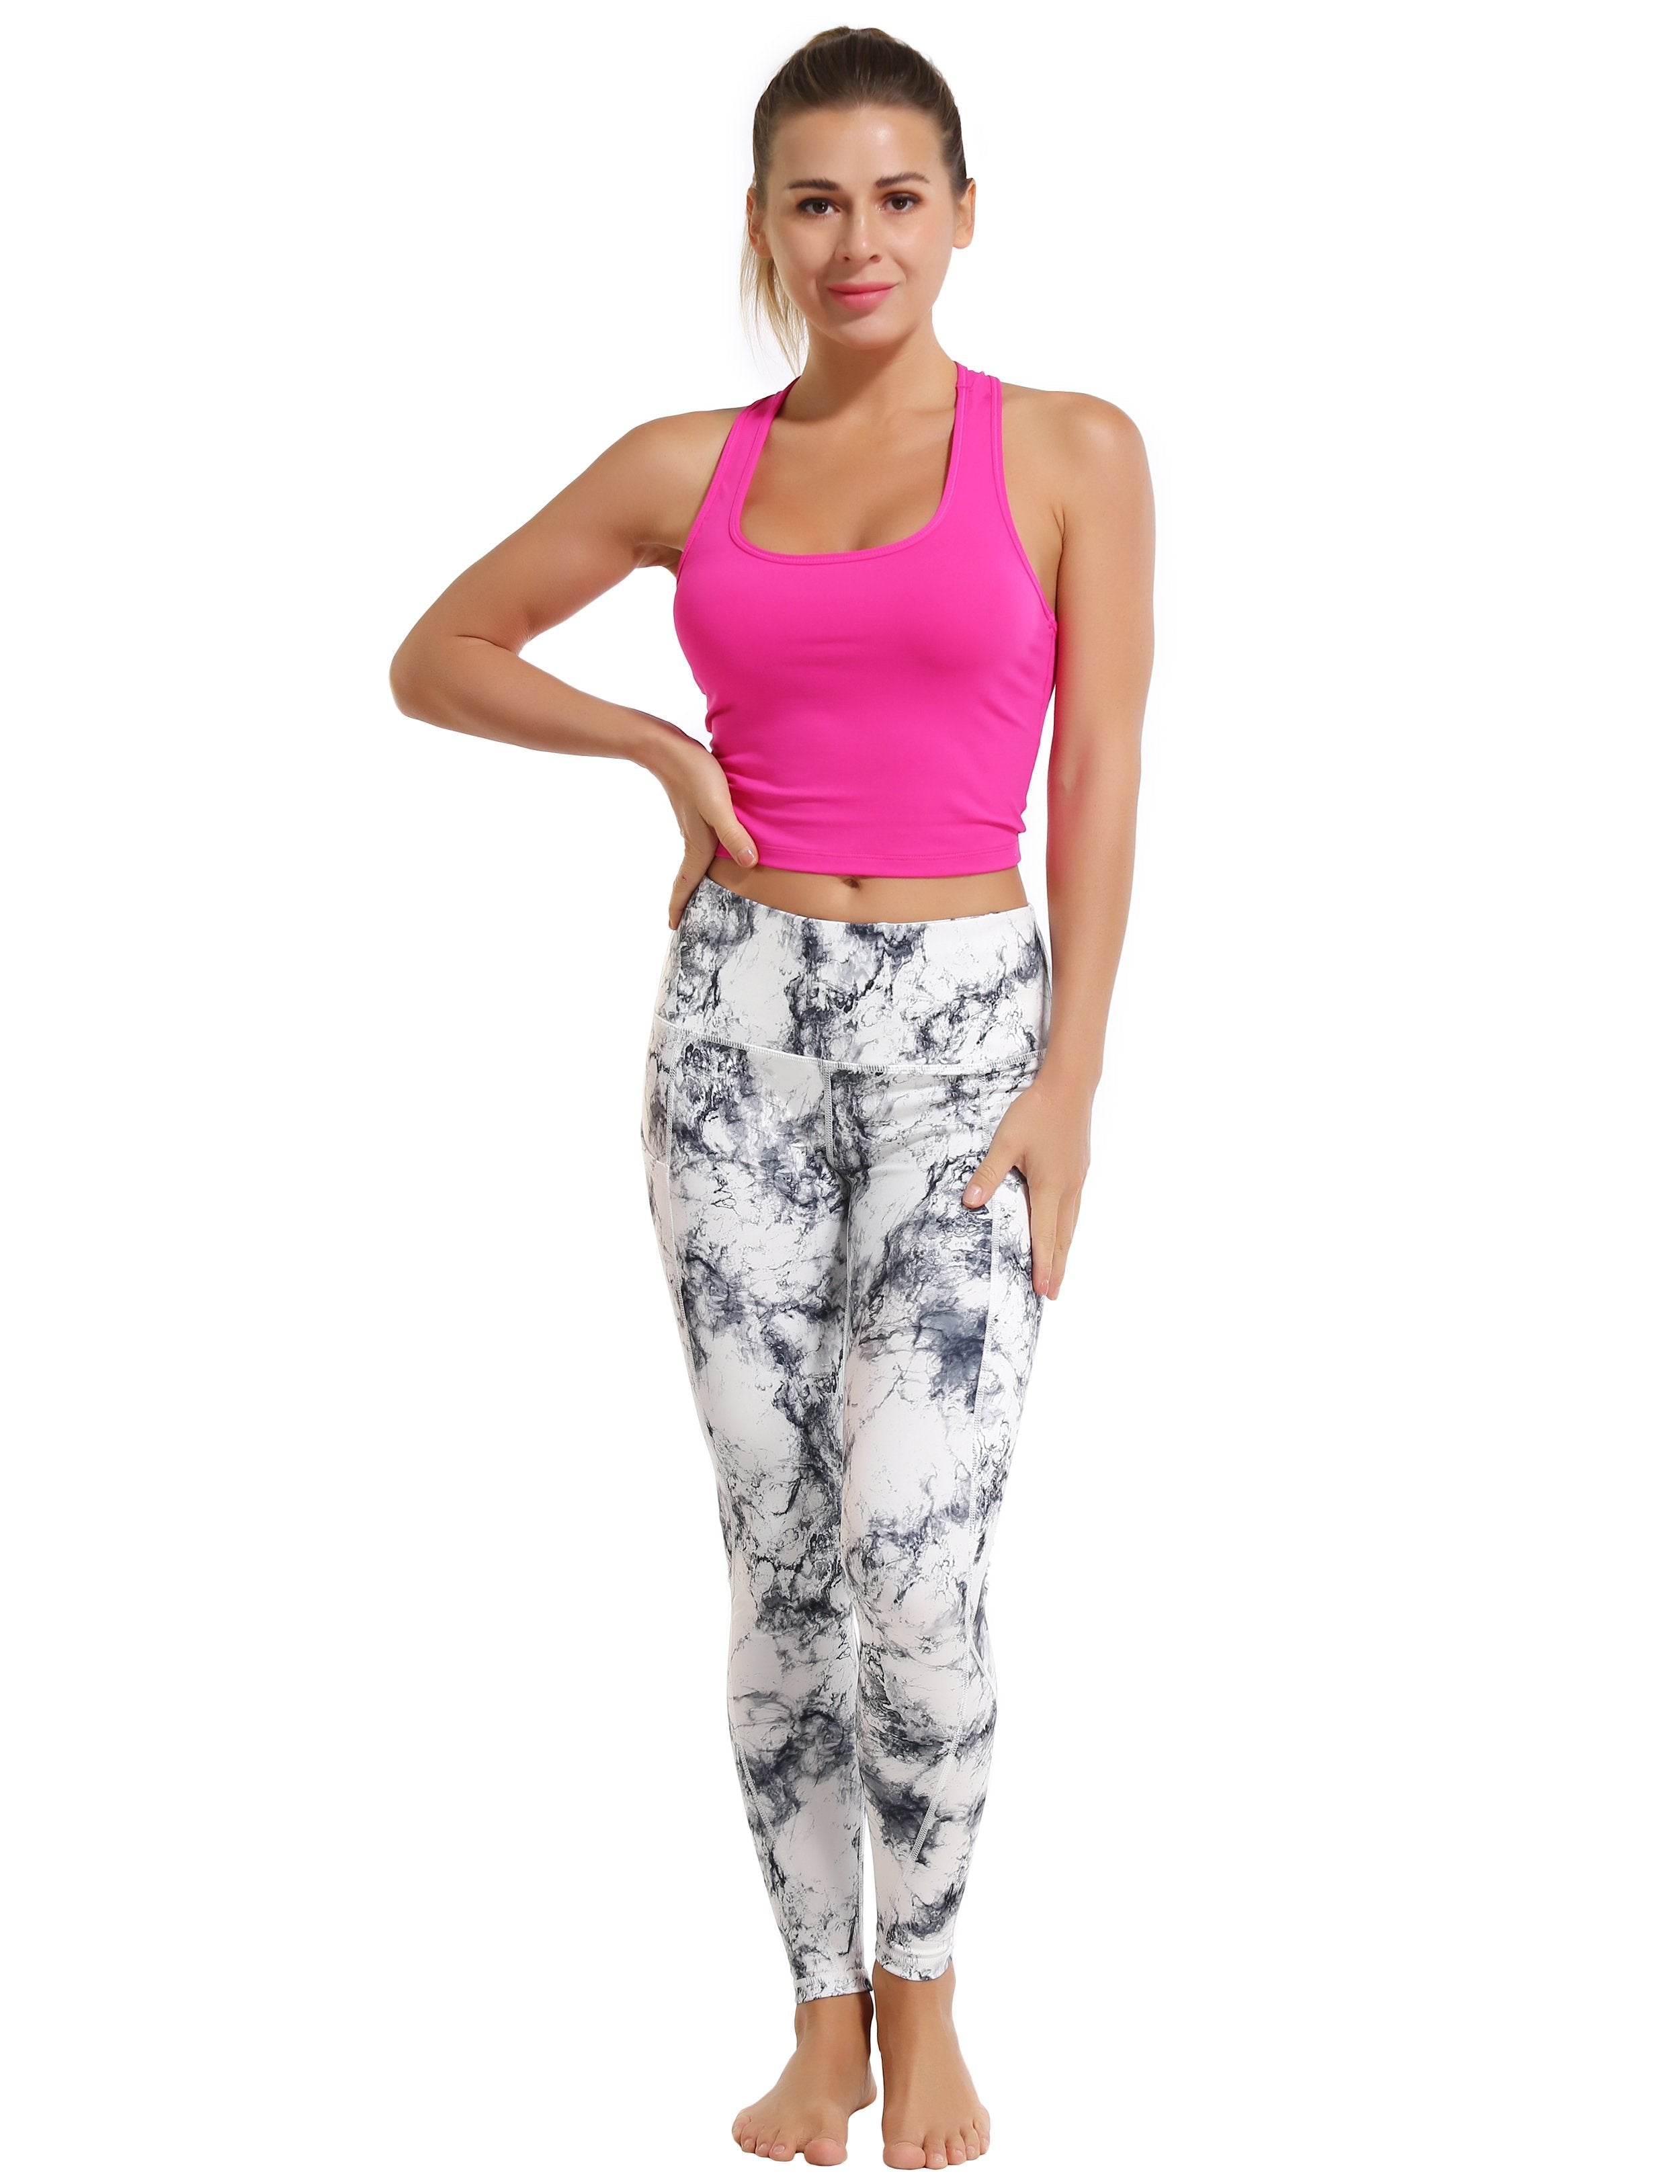 High Waist Side Pockets Tall Size Pants arabescato 78%Polyester/22%Spandex Fabric doesn't attract lint easily 4-way stretch No see-through Moisture-wicking Tummy control Inner pocket